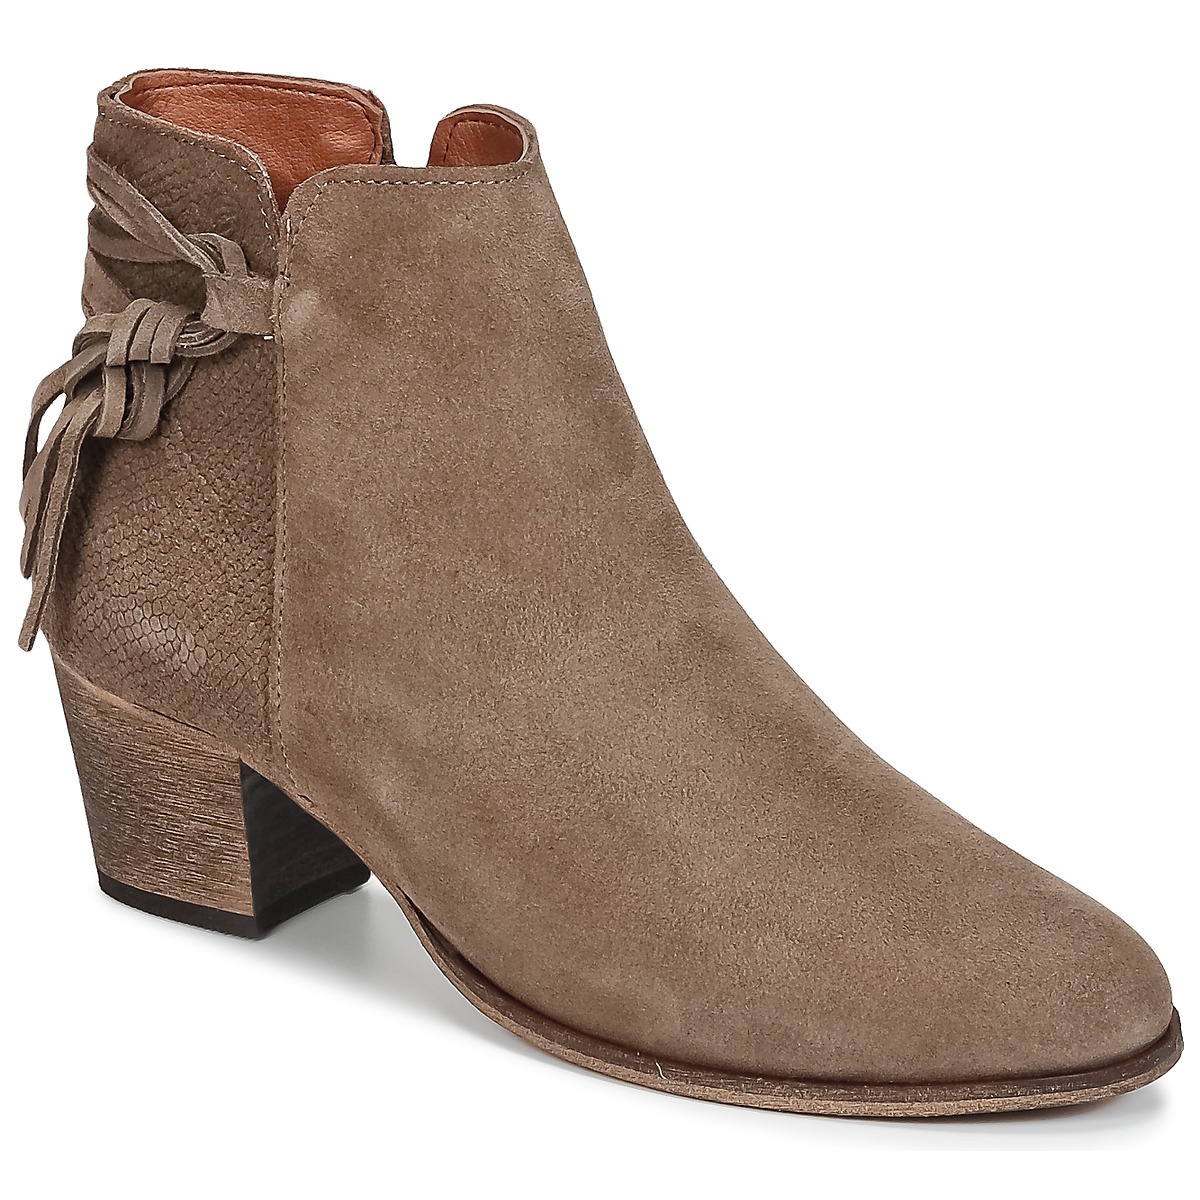 Lady Ankle Boots in Brown Spartoo Betty London GOOFASH